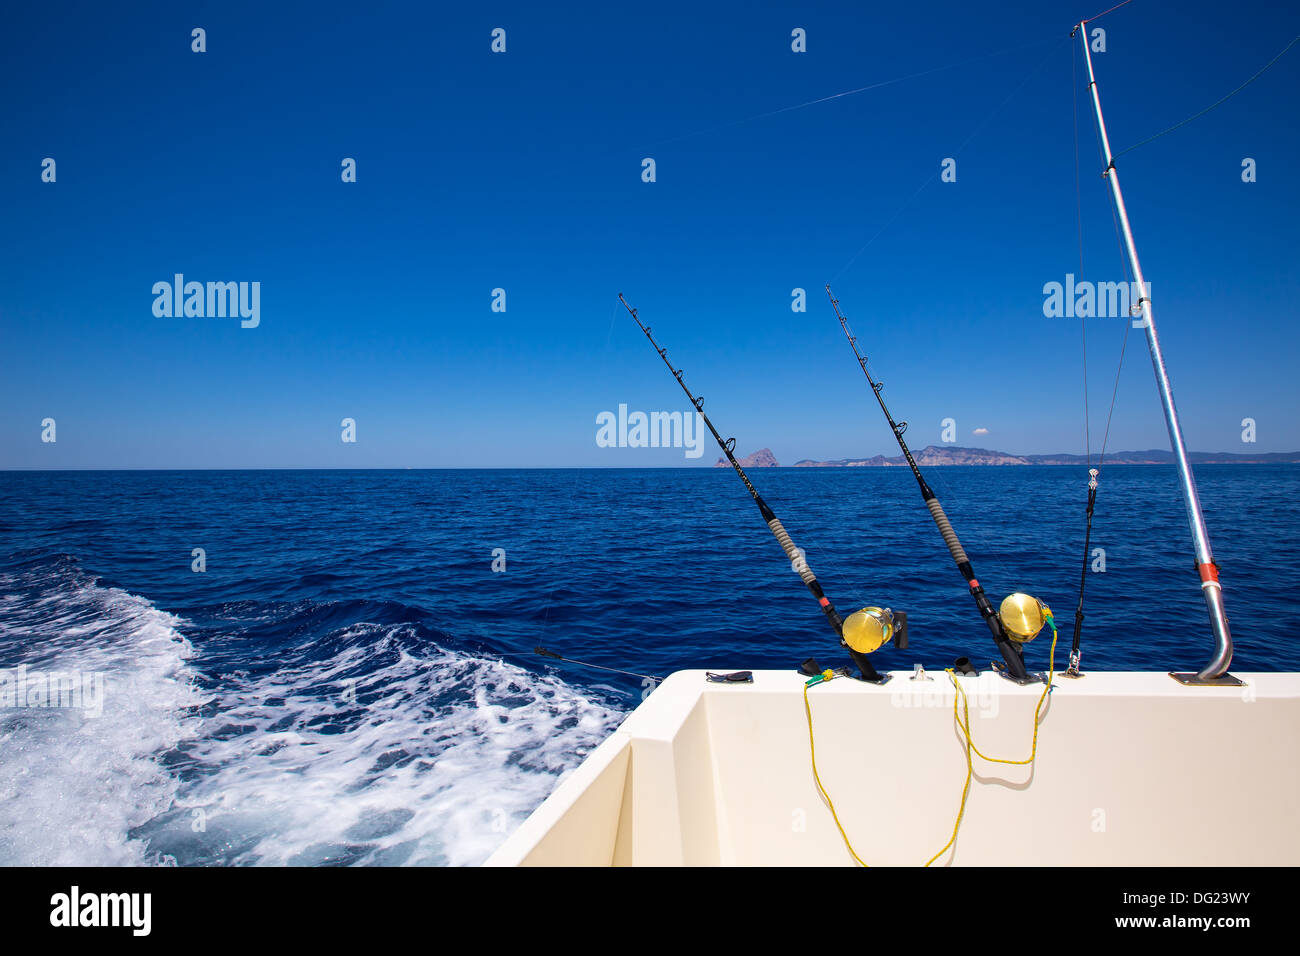 Ibiza fishing boat trolling with rods and reels in blue Mediterranean sea Balearic Stock Photo